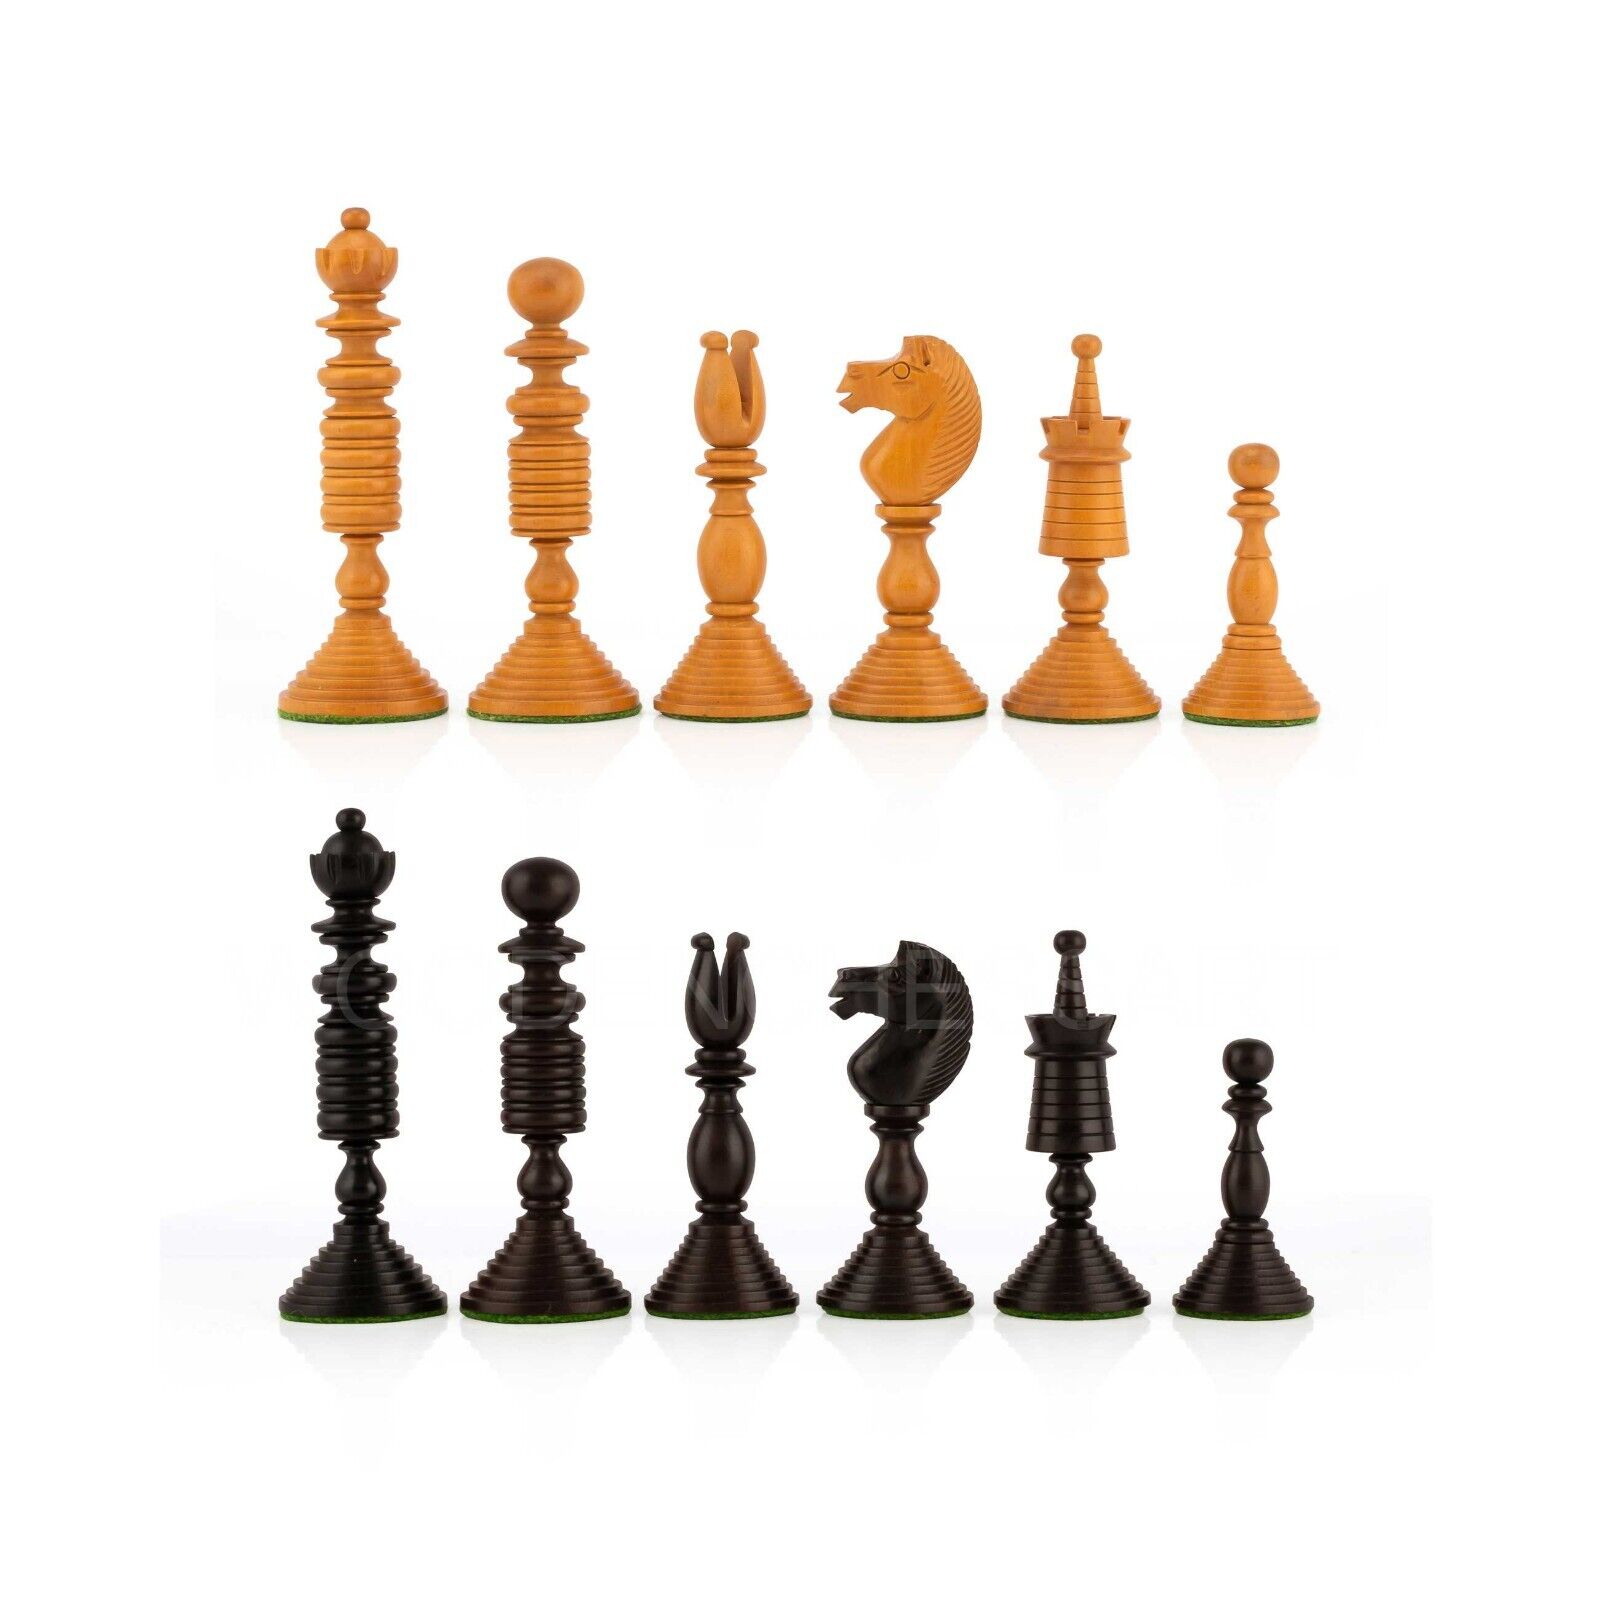 4.7” International Staunton Chess Pieces Only in Antiqued Boxwood & Ebony